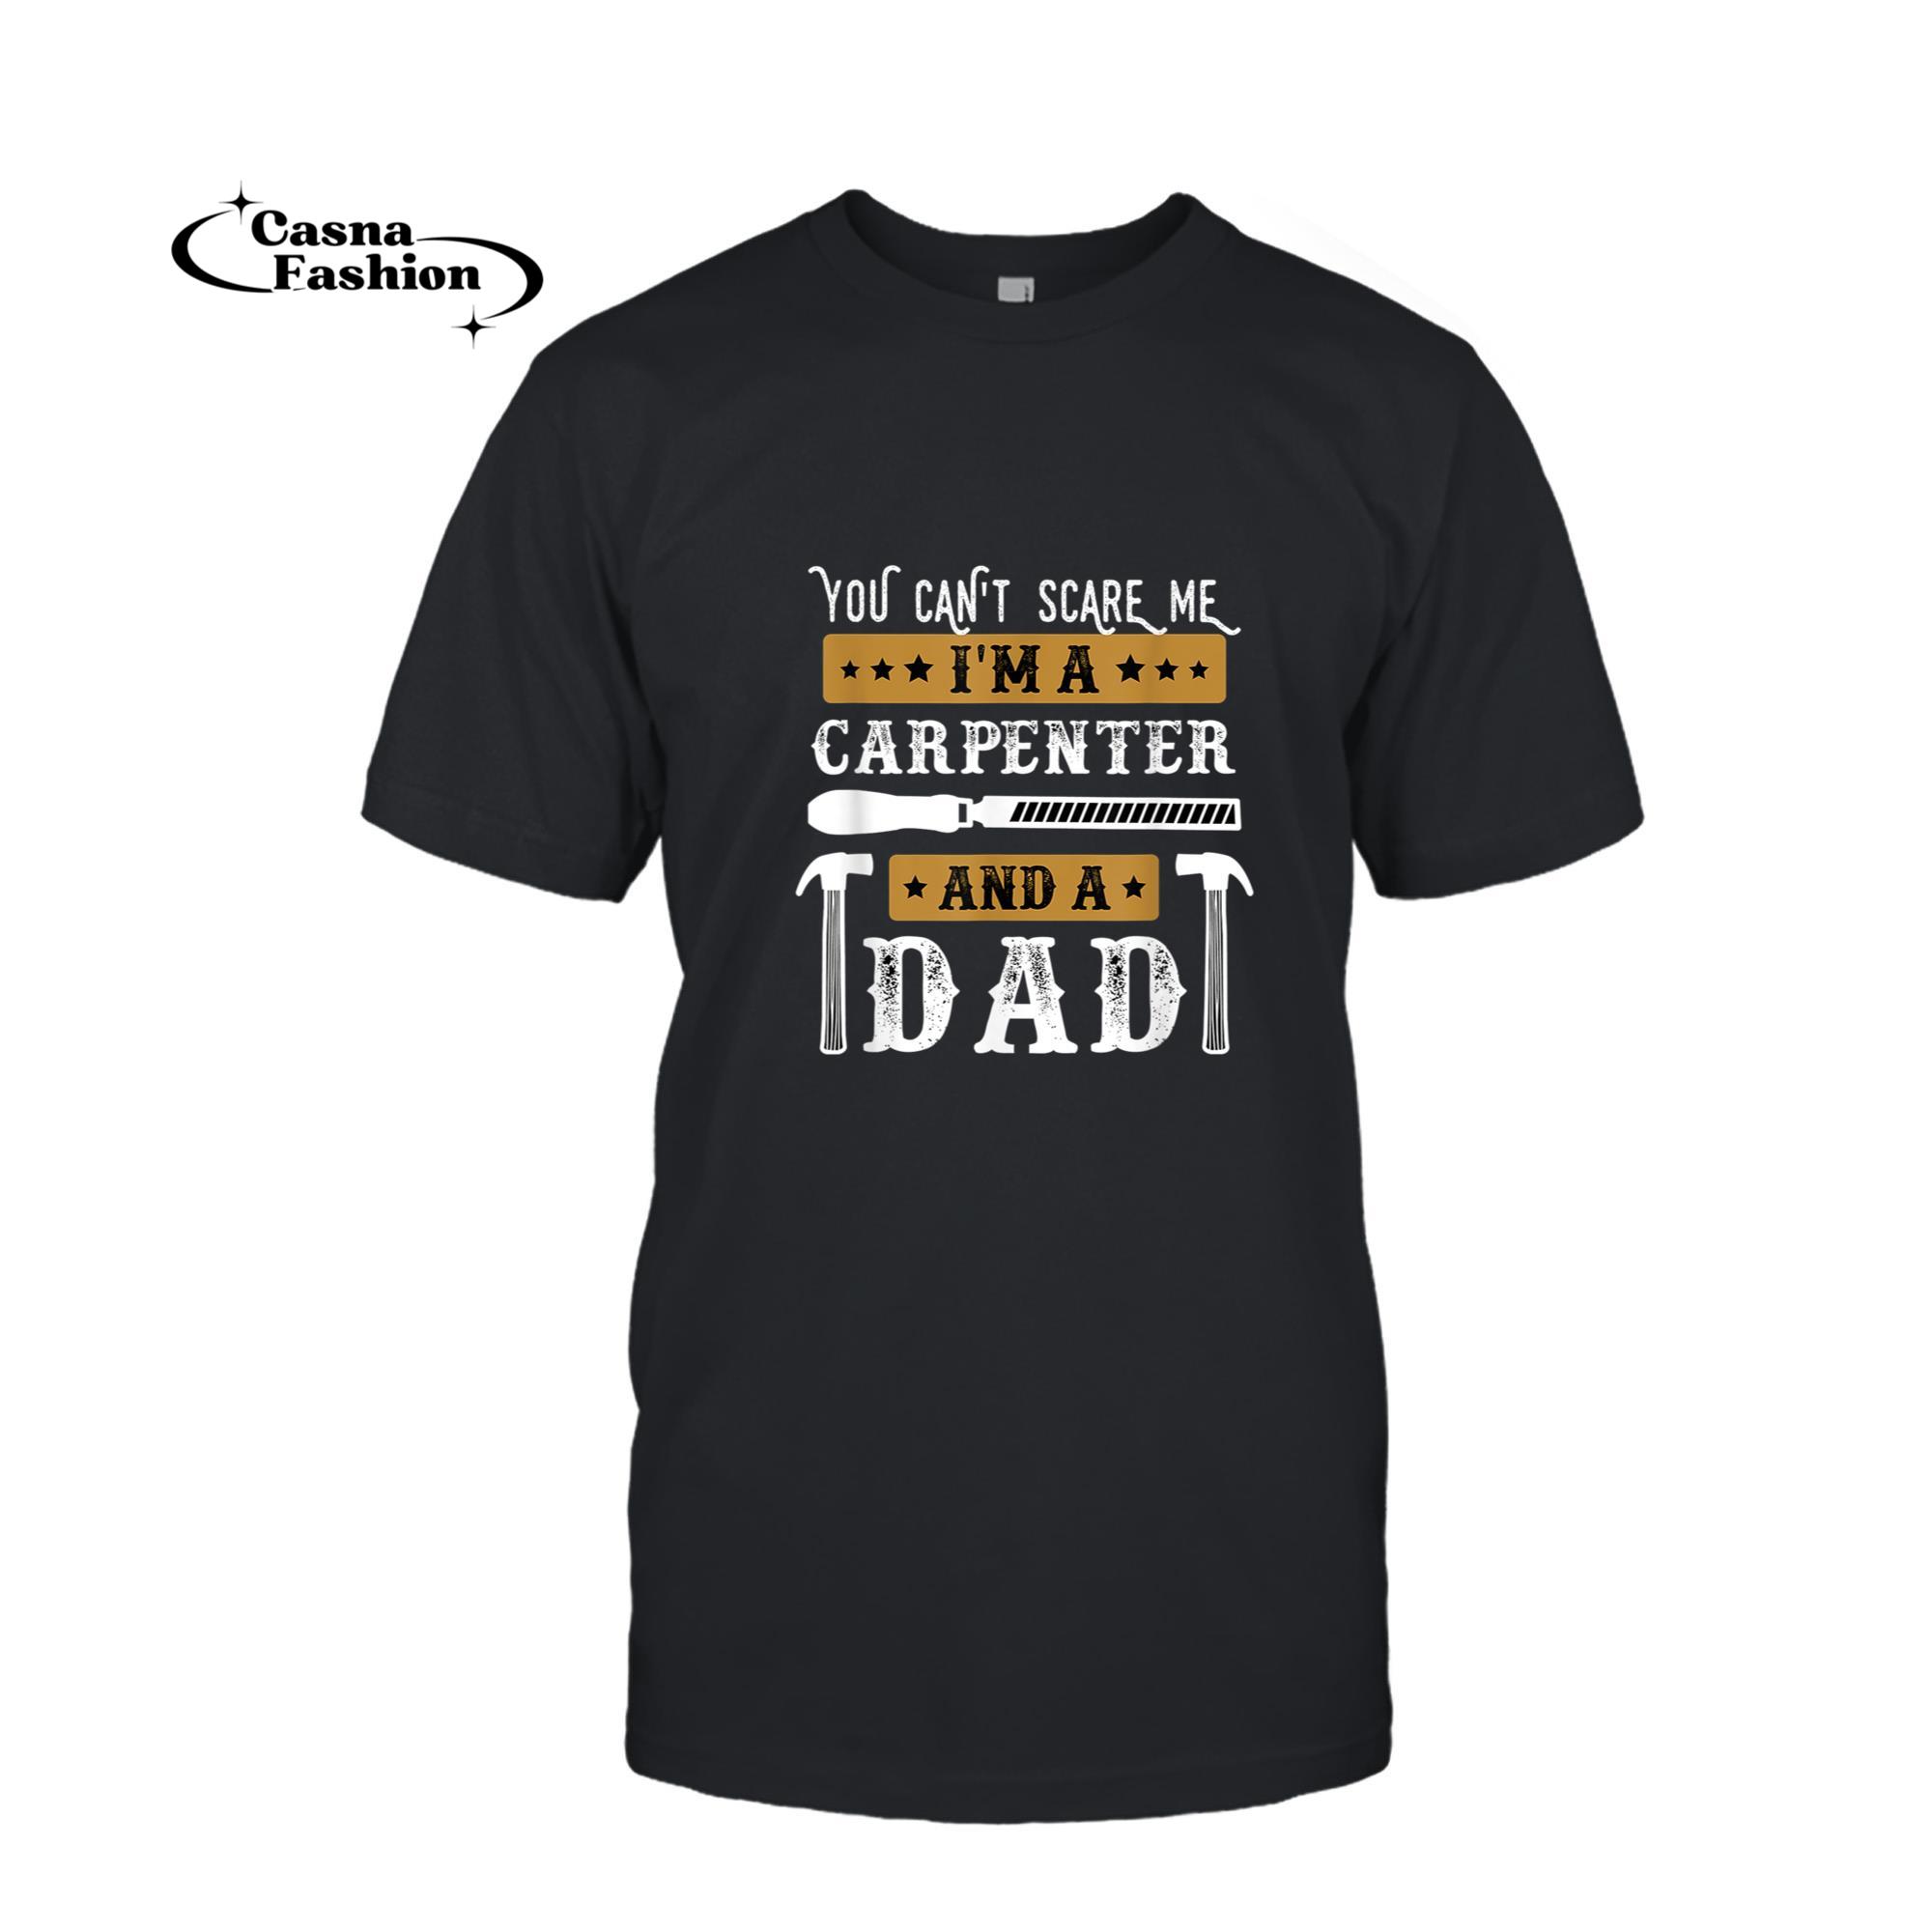 casnafashion_T-shirt_You Cant Scare Me I Am A Carpenter And A Dad T-Shirt_T-shirt_Black